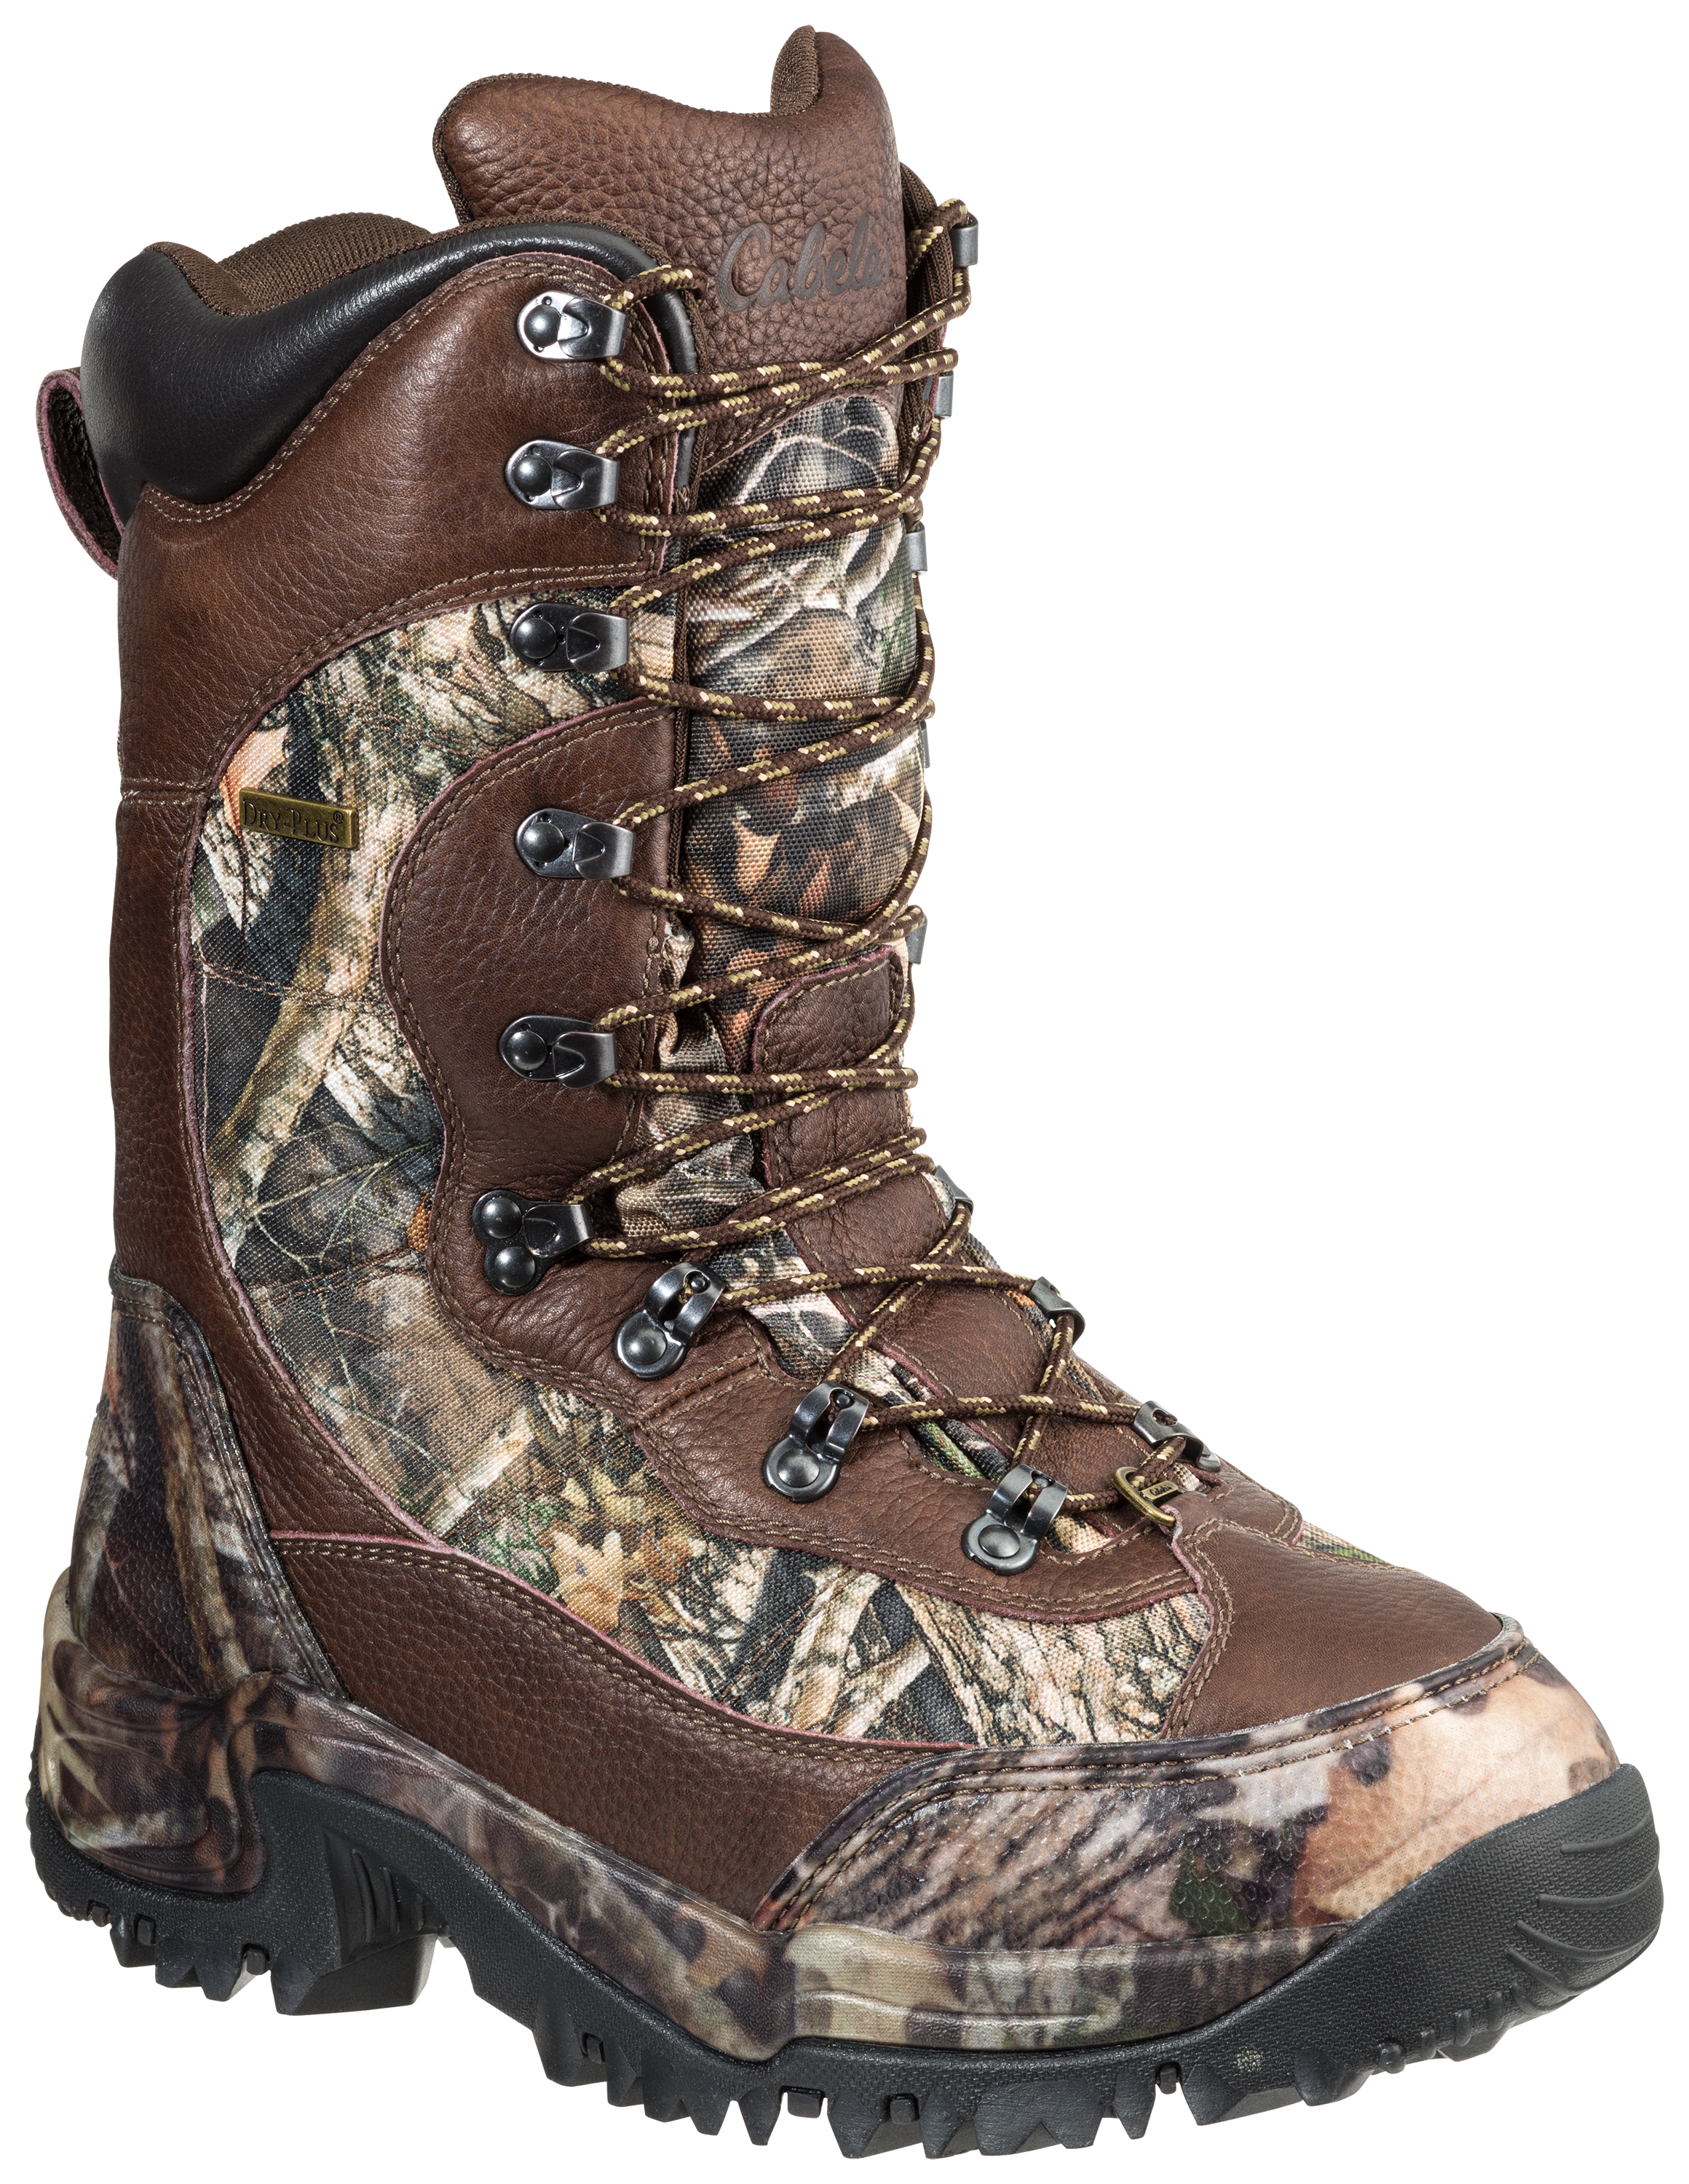 Cabela's Inferno Insulated Waterproof Hunting Boots for Men - Black - 10M